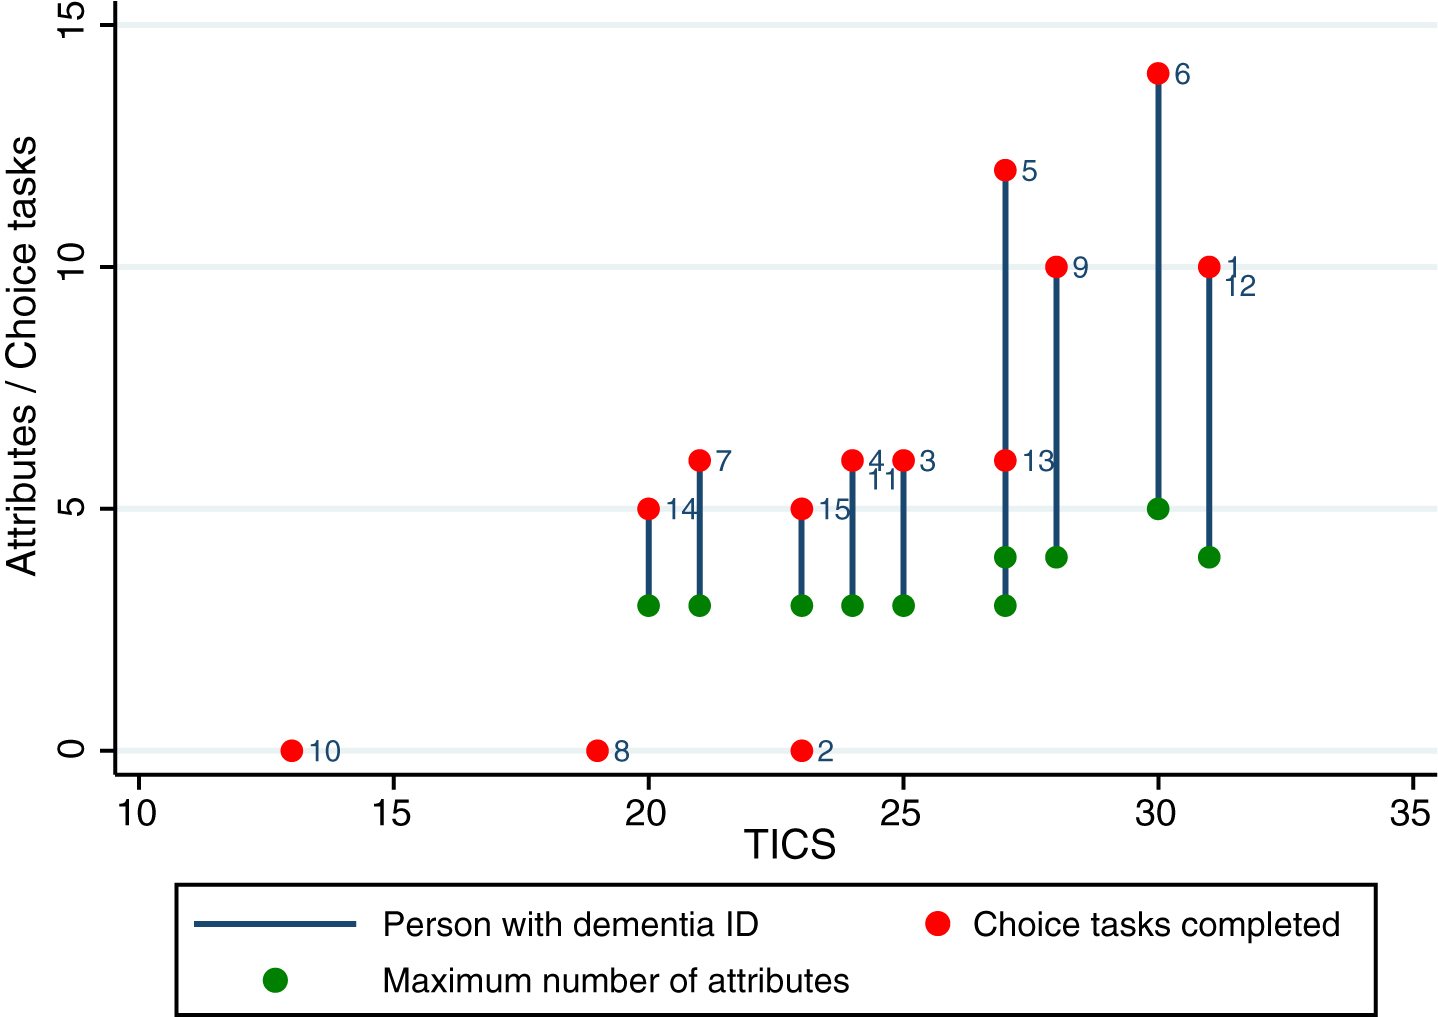 Number of attributes and choice tasks completed by individual scores on the Telephone Interview Cognitive Screening in participants with dementia.